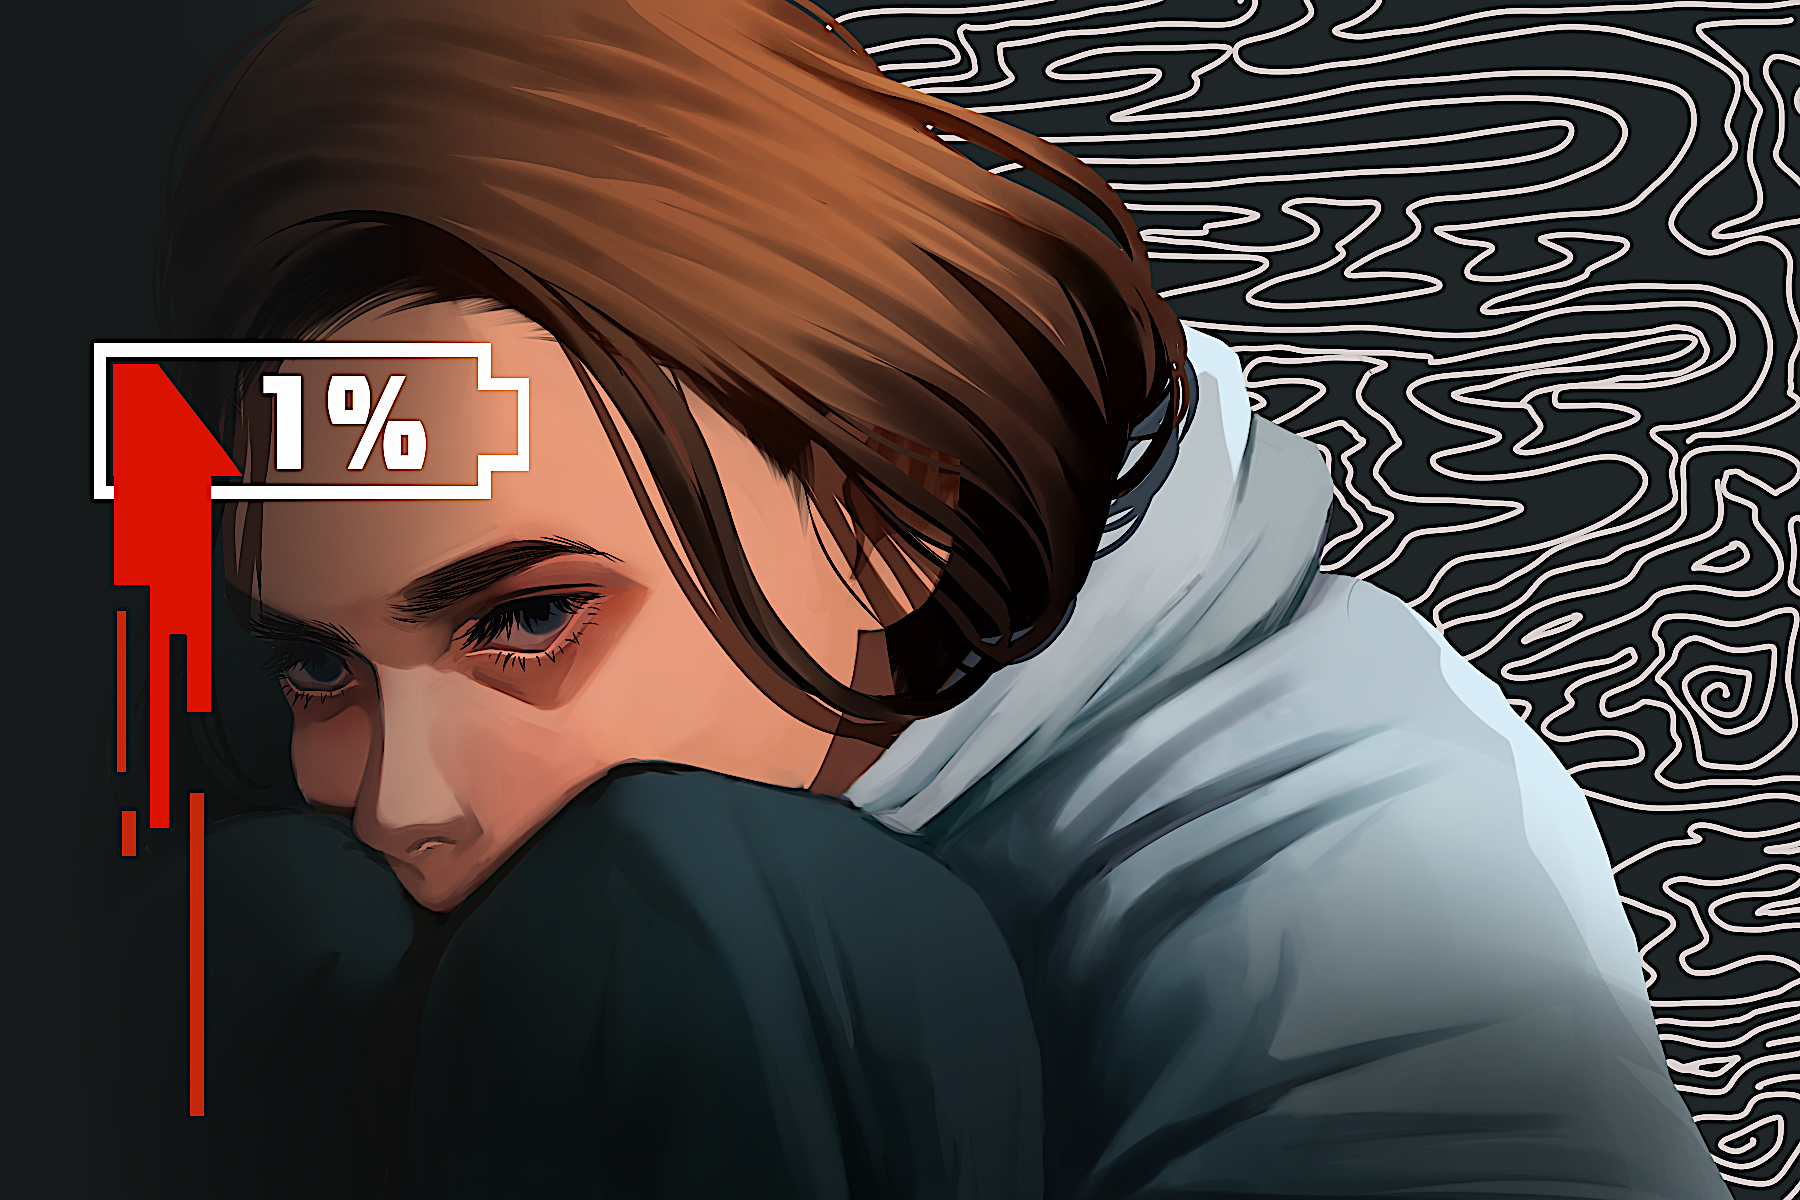 An illustration of Emma Chamberlain and a low battery sign.